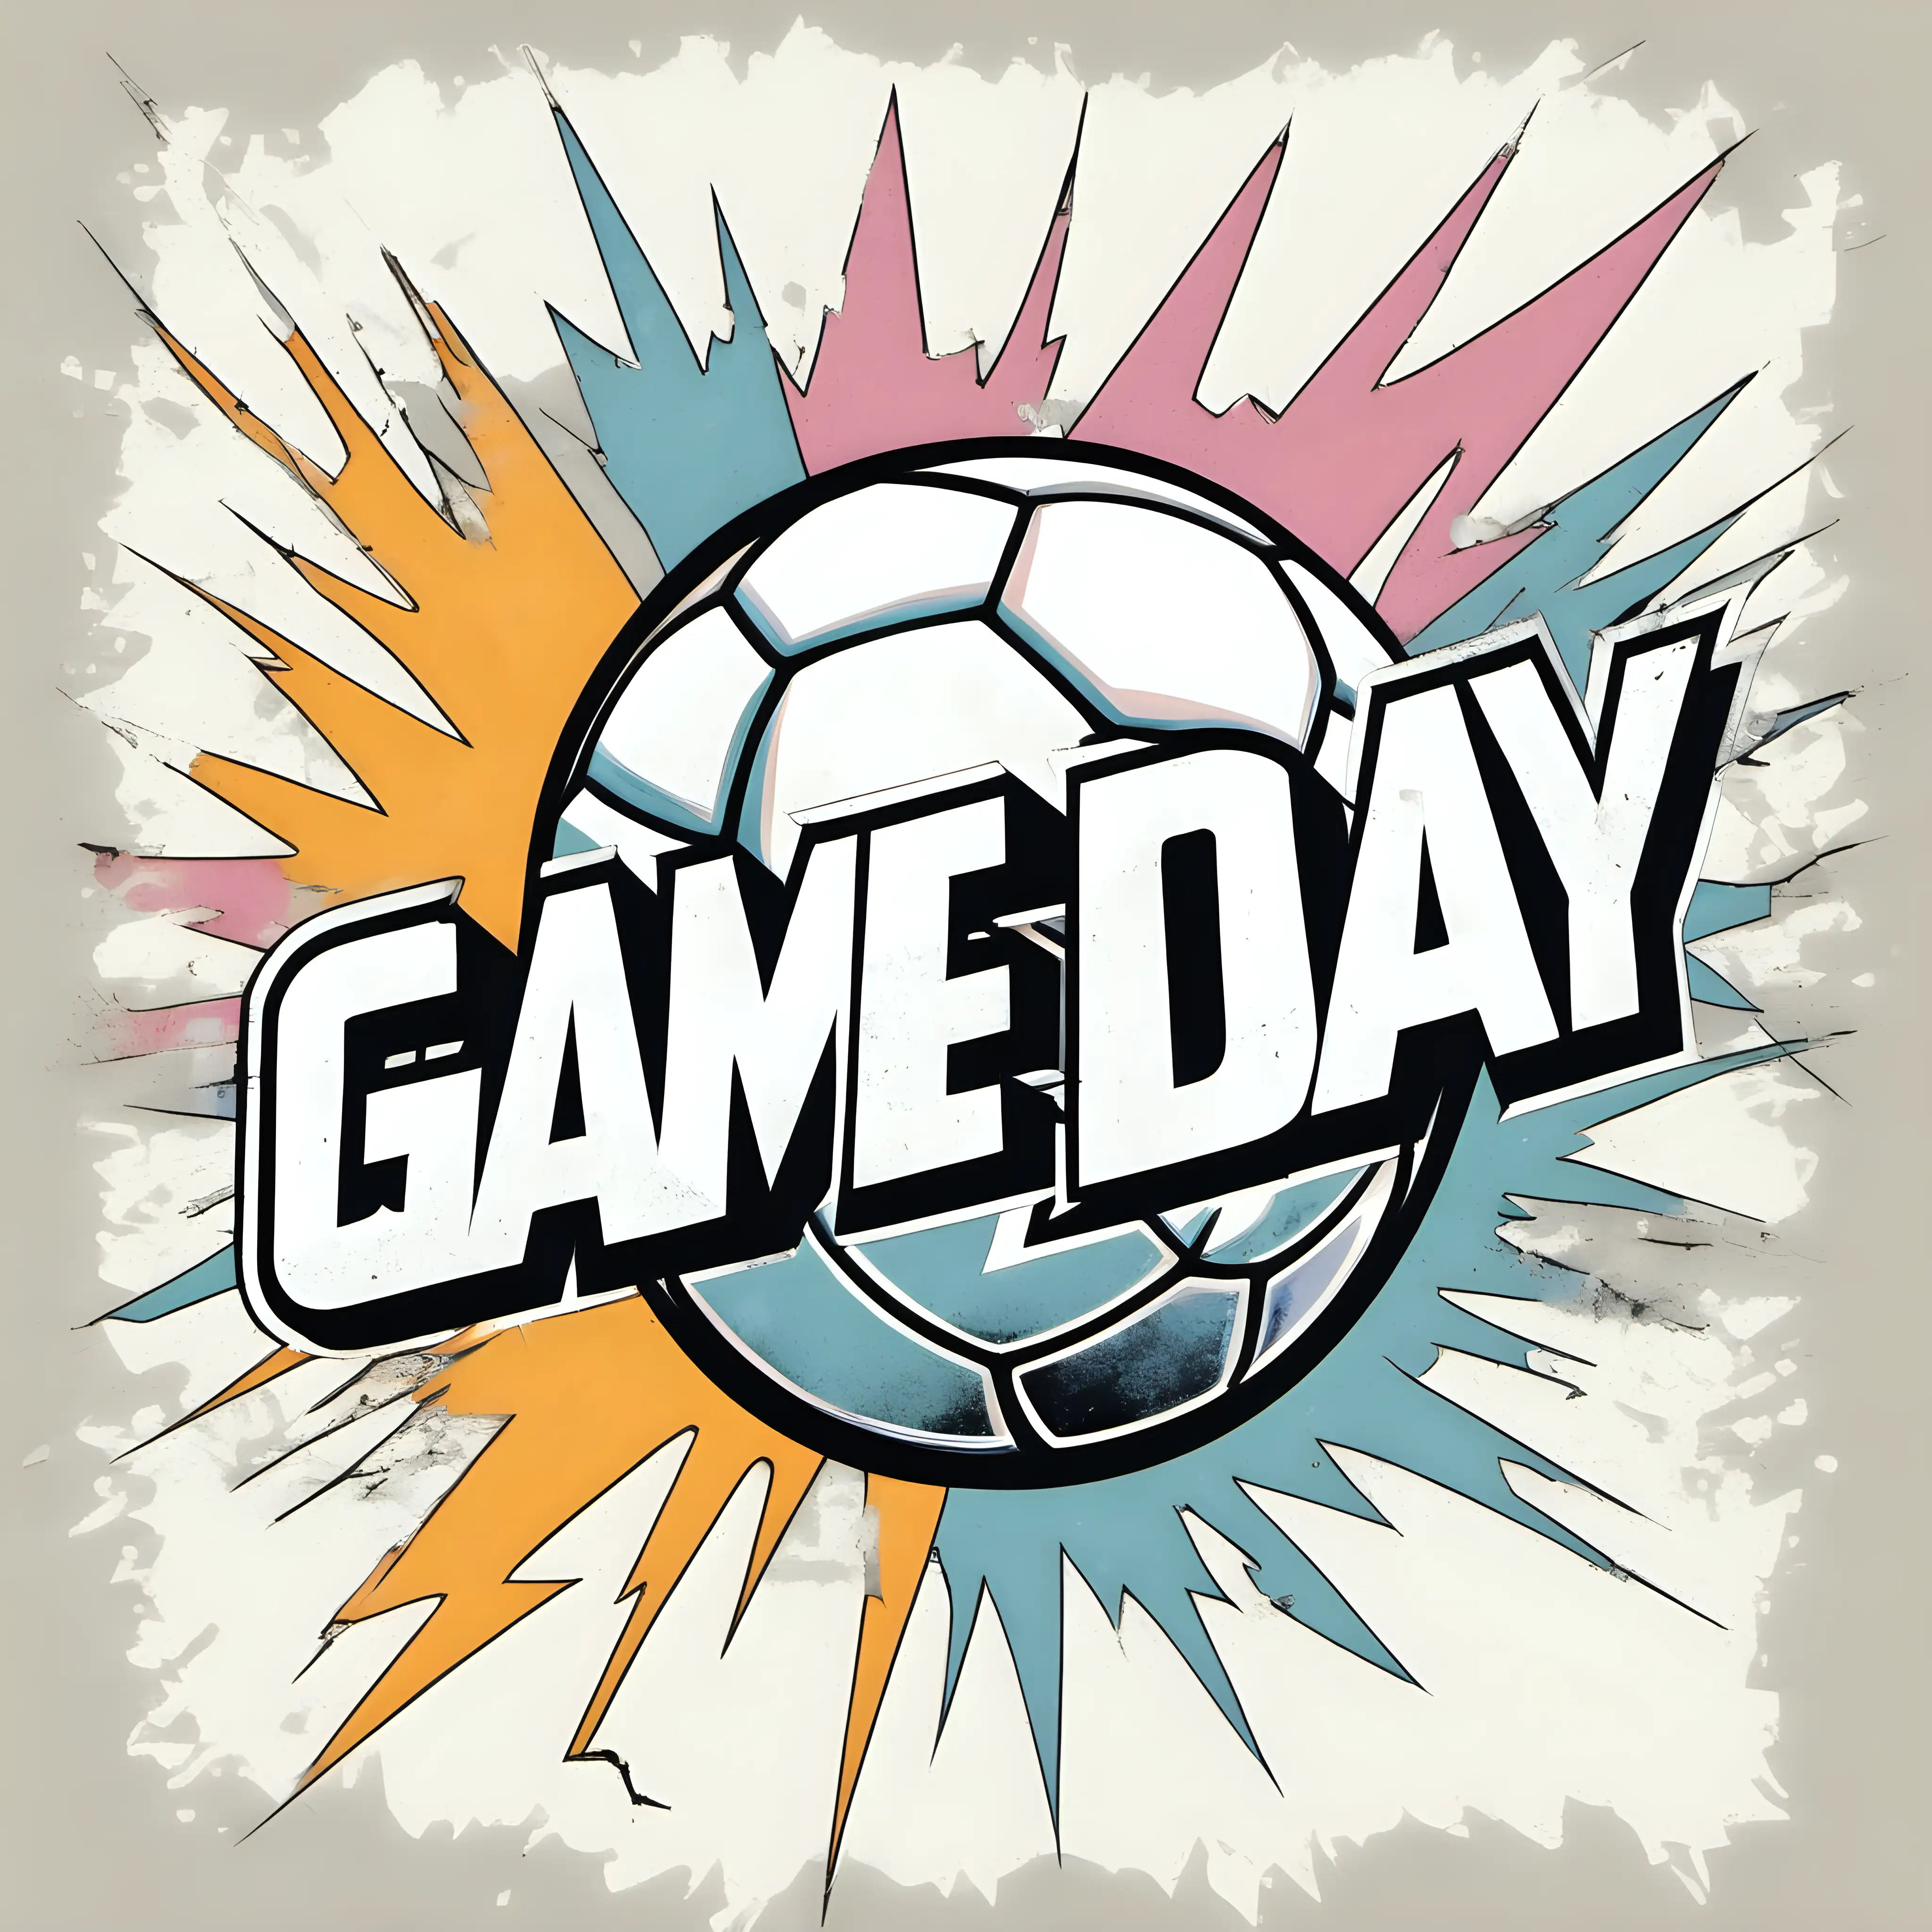 Pastel Soccer Game Day with Distressed Lightning Bolt Design on White Background